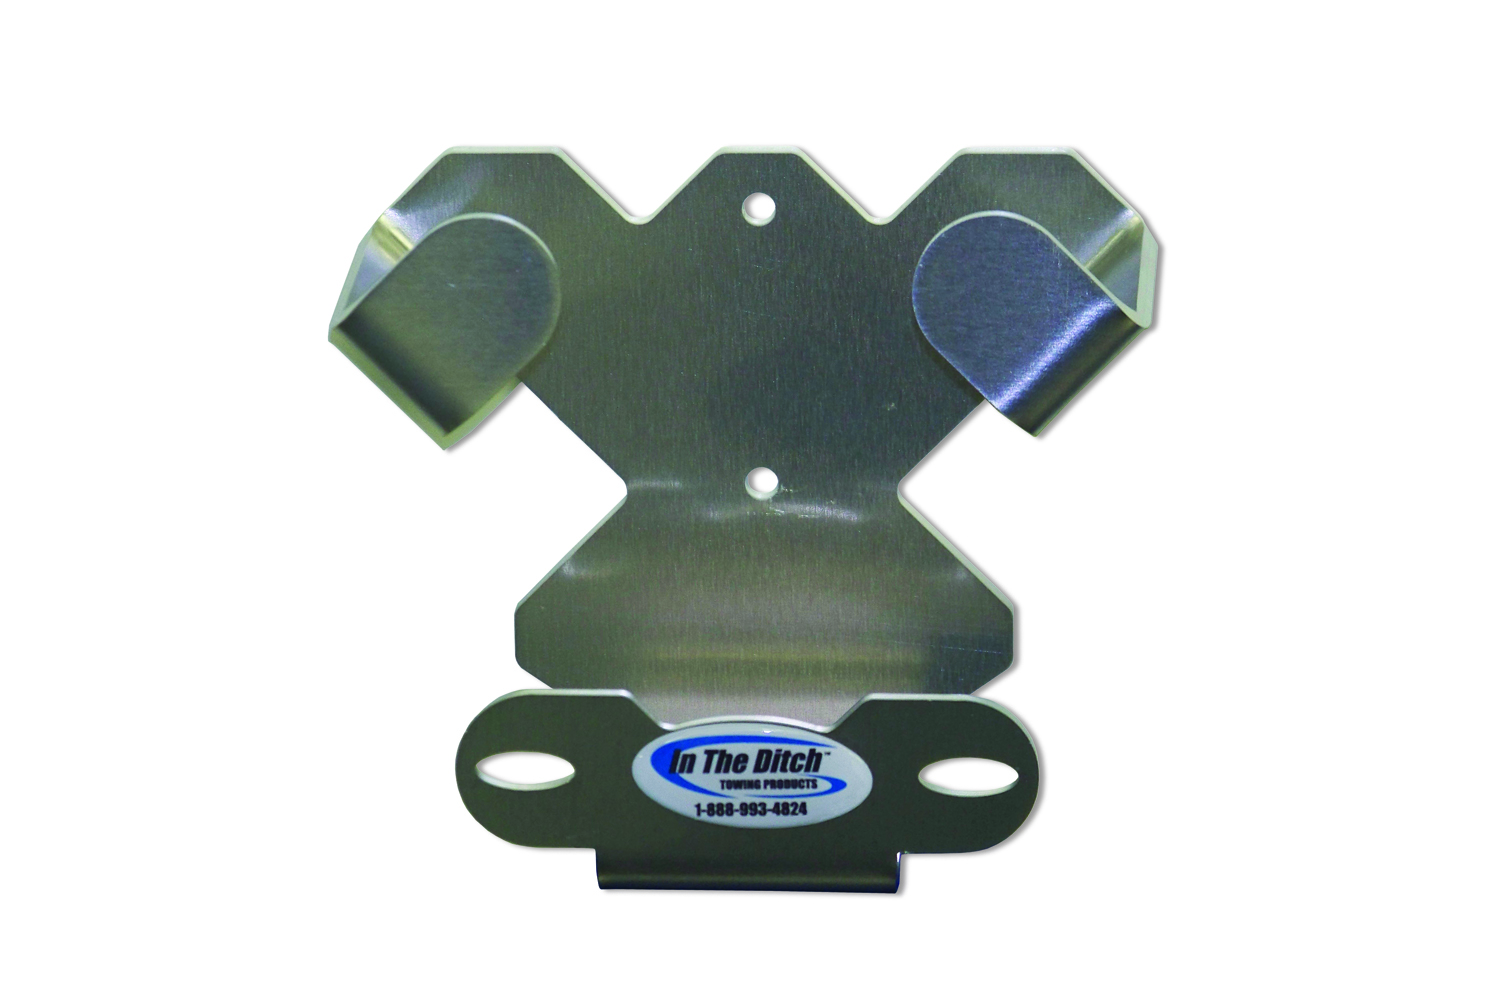 Lug Wrench Bracket - In The Ditch Towing Products : In The Ditch